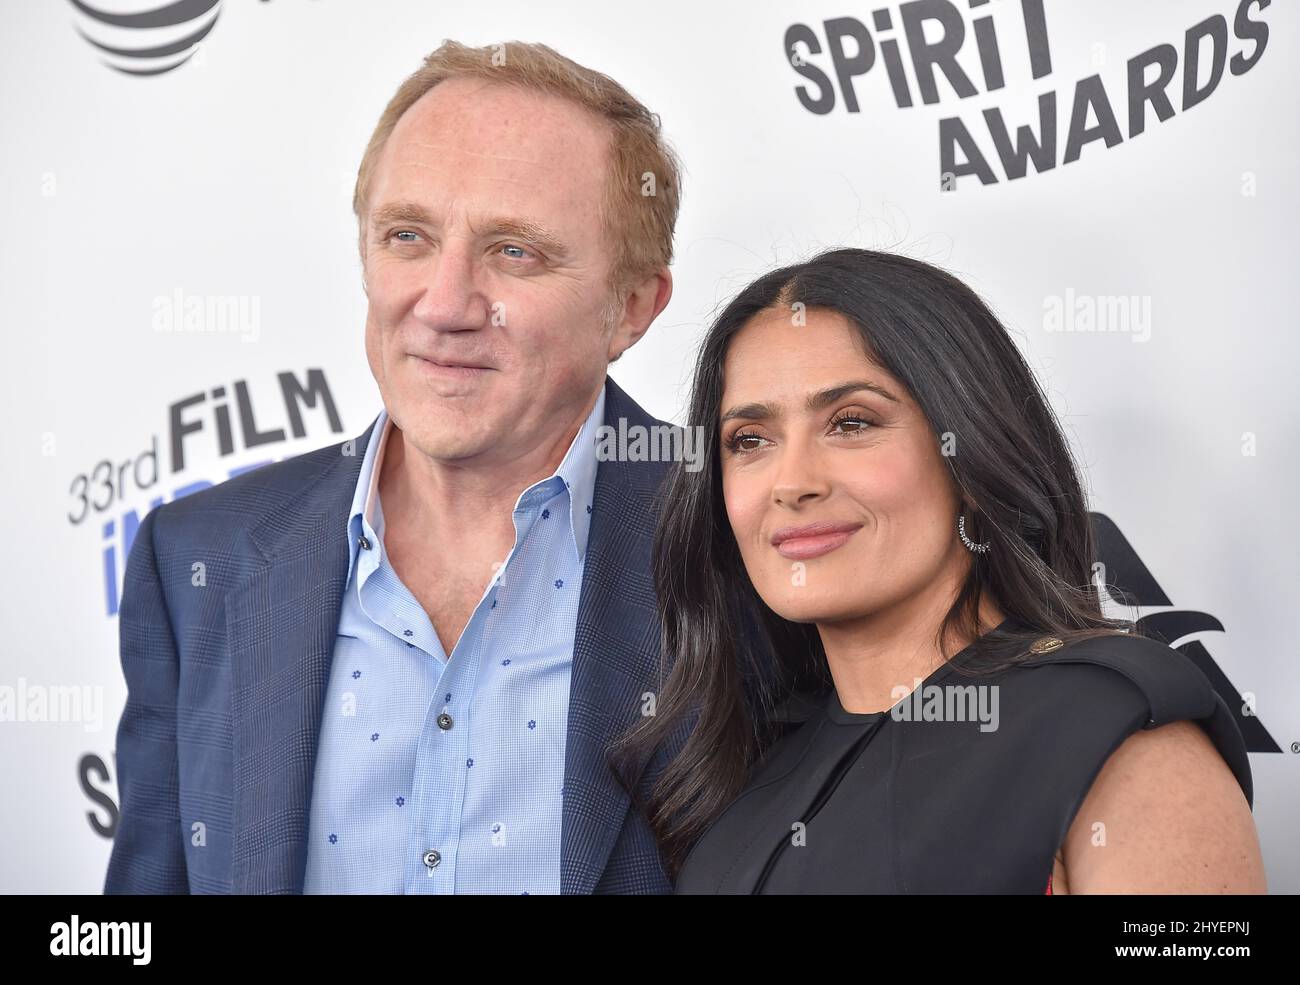 Salma Hayek and Francois-Henri Pinault at the 2018 Film Independent Spirit Awards held in a tent on Santa Monica beach on March 3, 2018 in Santa Monica, CA. Stock Photo